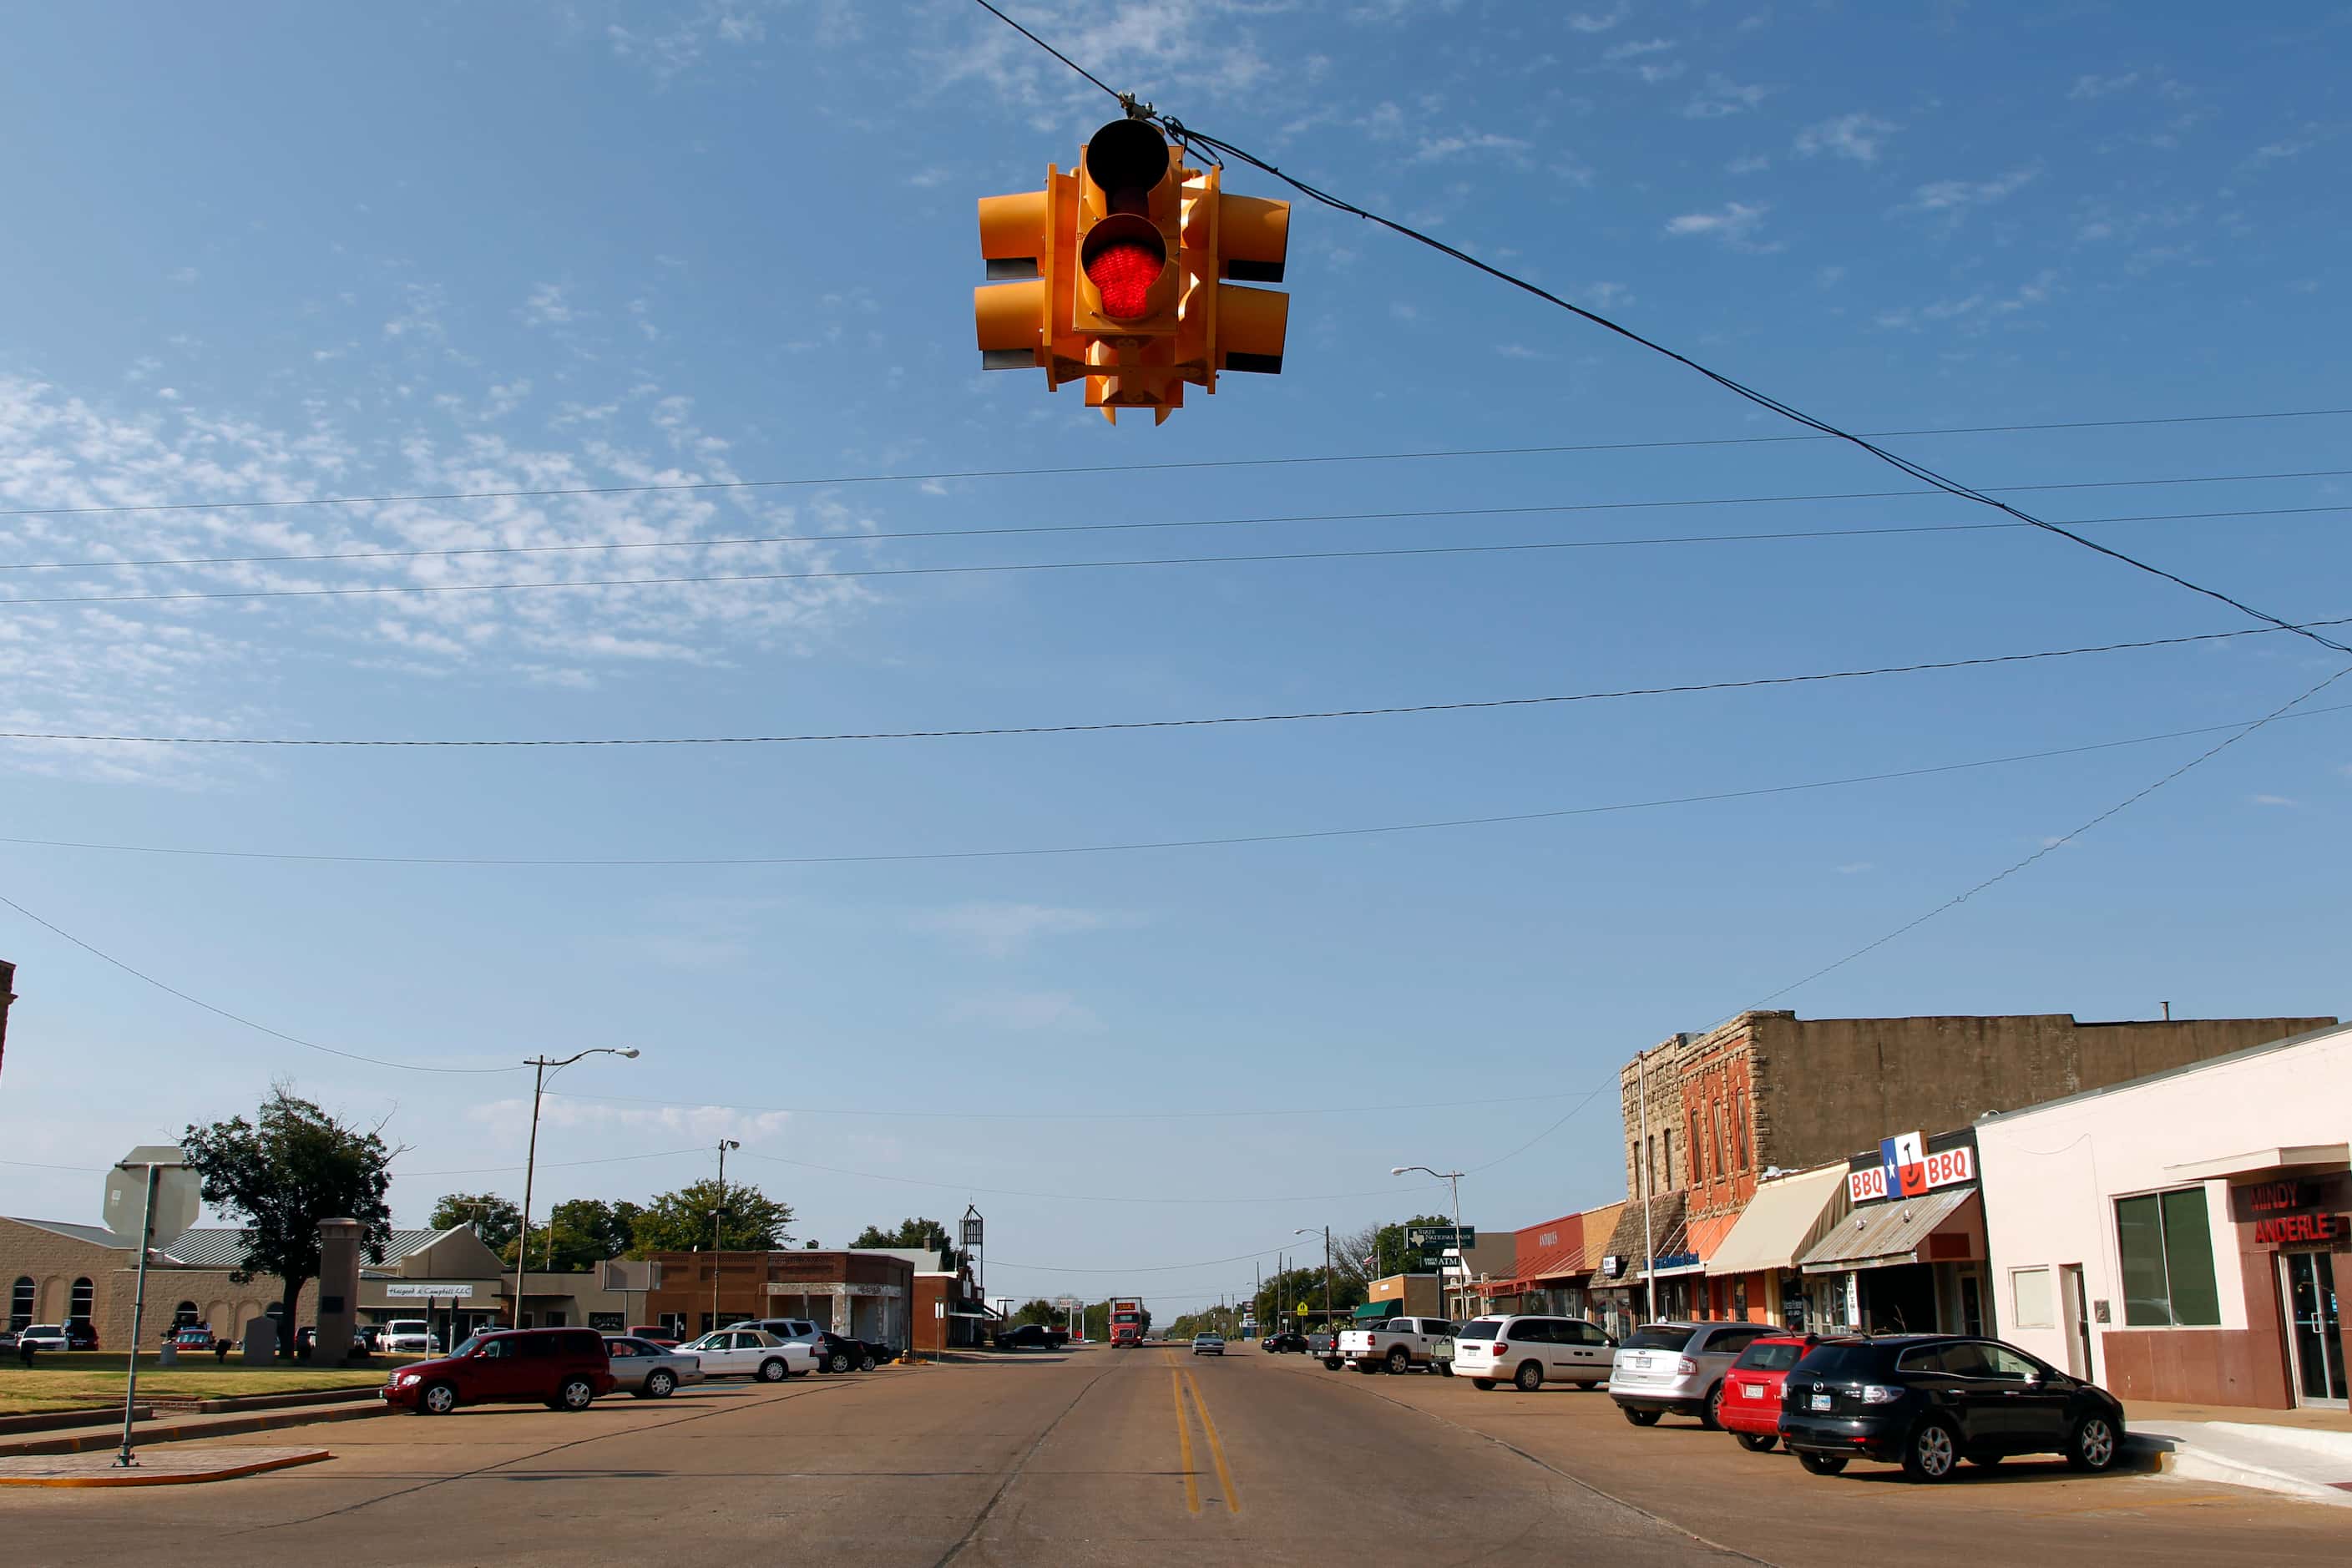 Looking down Center Street in downtown Archer City, Texas, a one traffic-light town.